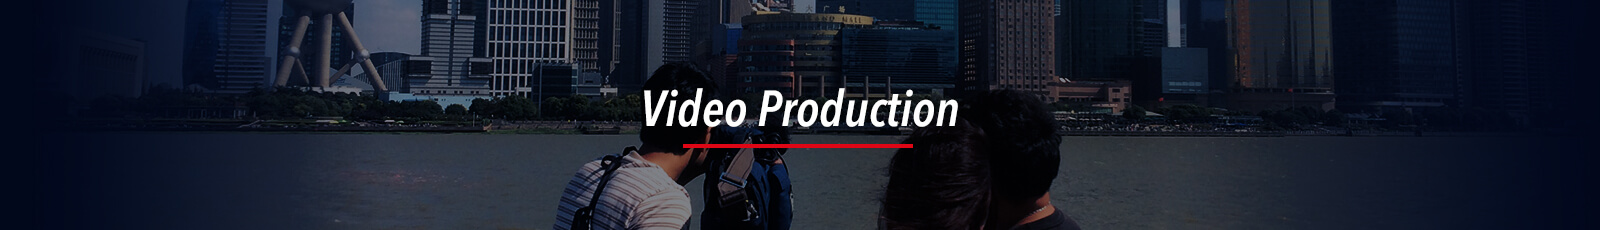 FLY MEDIA Video Production